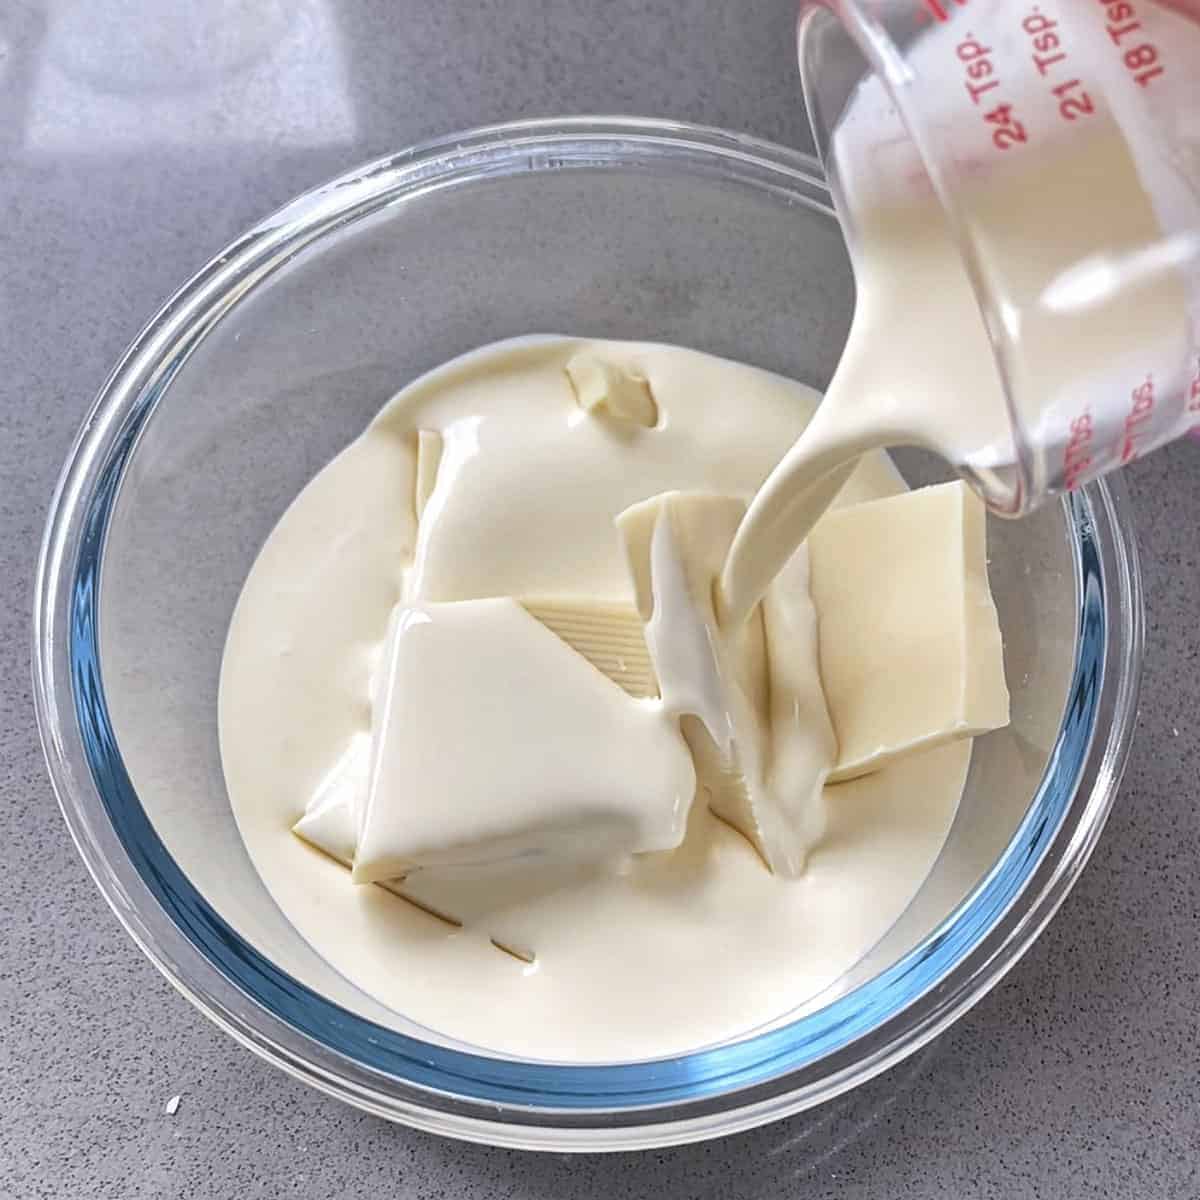 Cream being poured into a glass bowl with white chocolate in it.